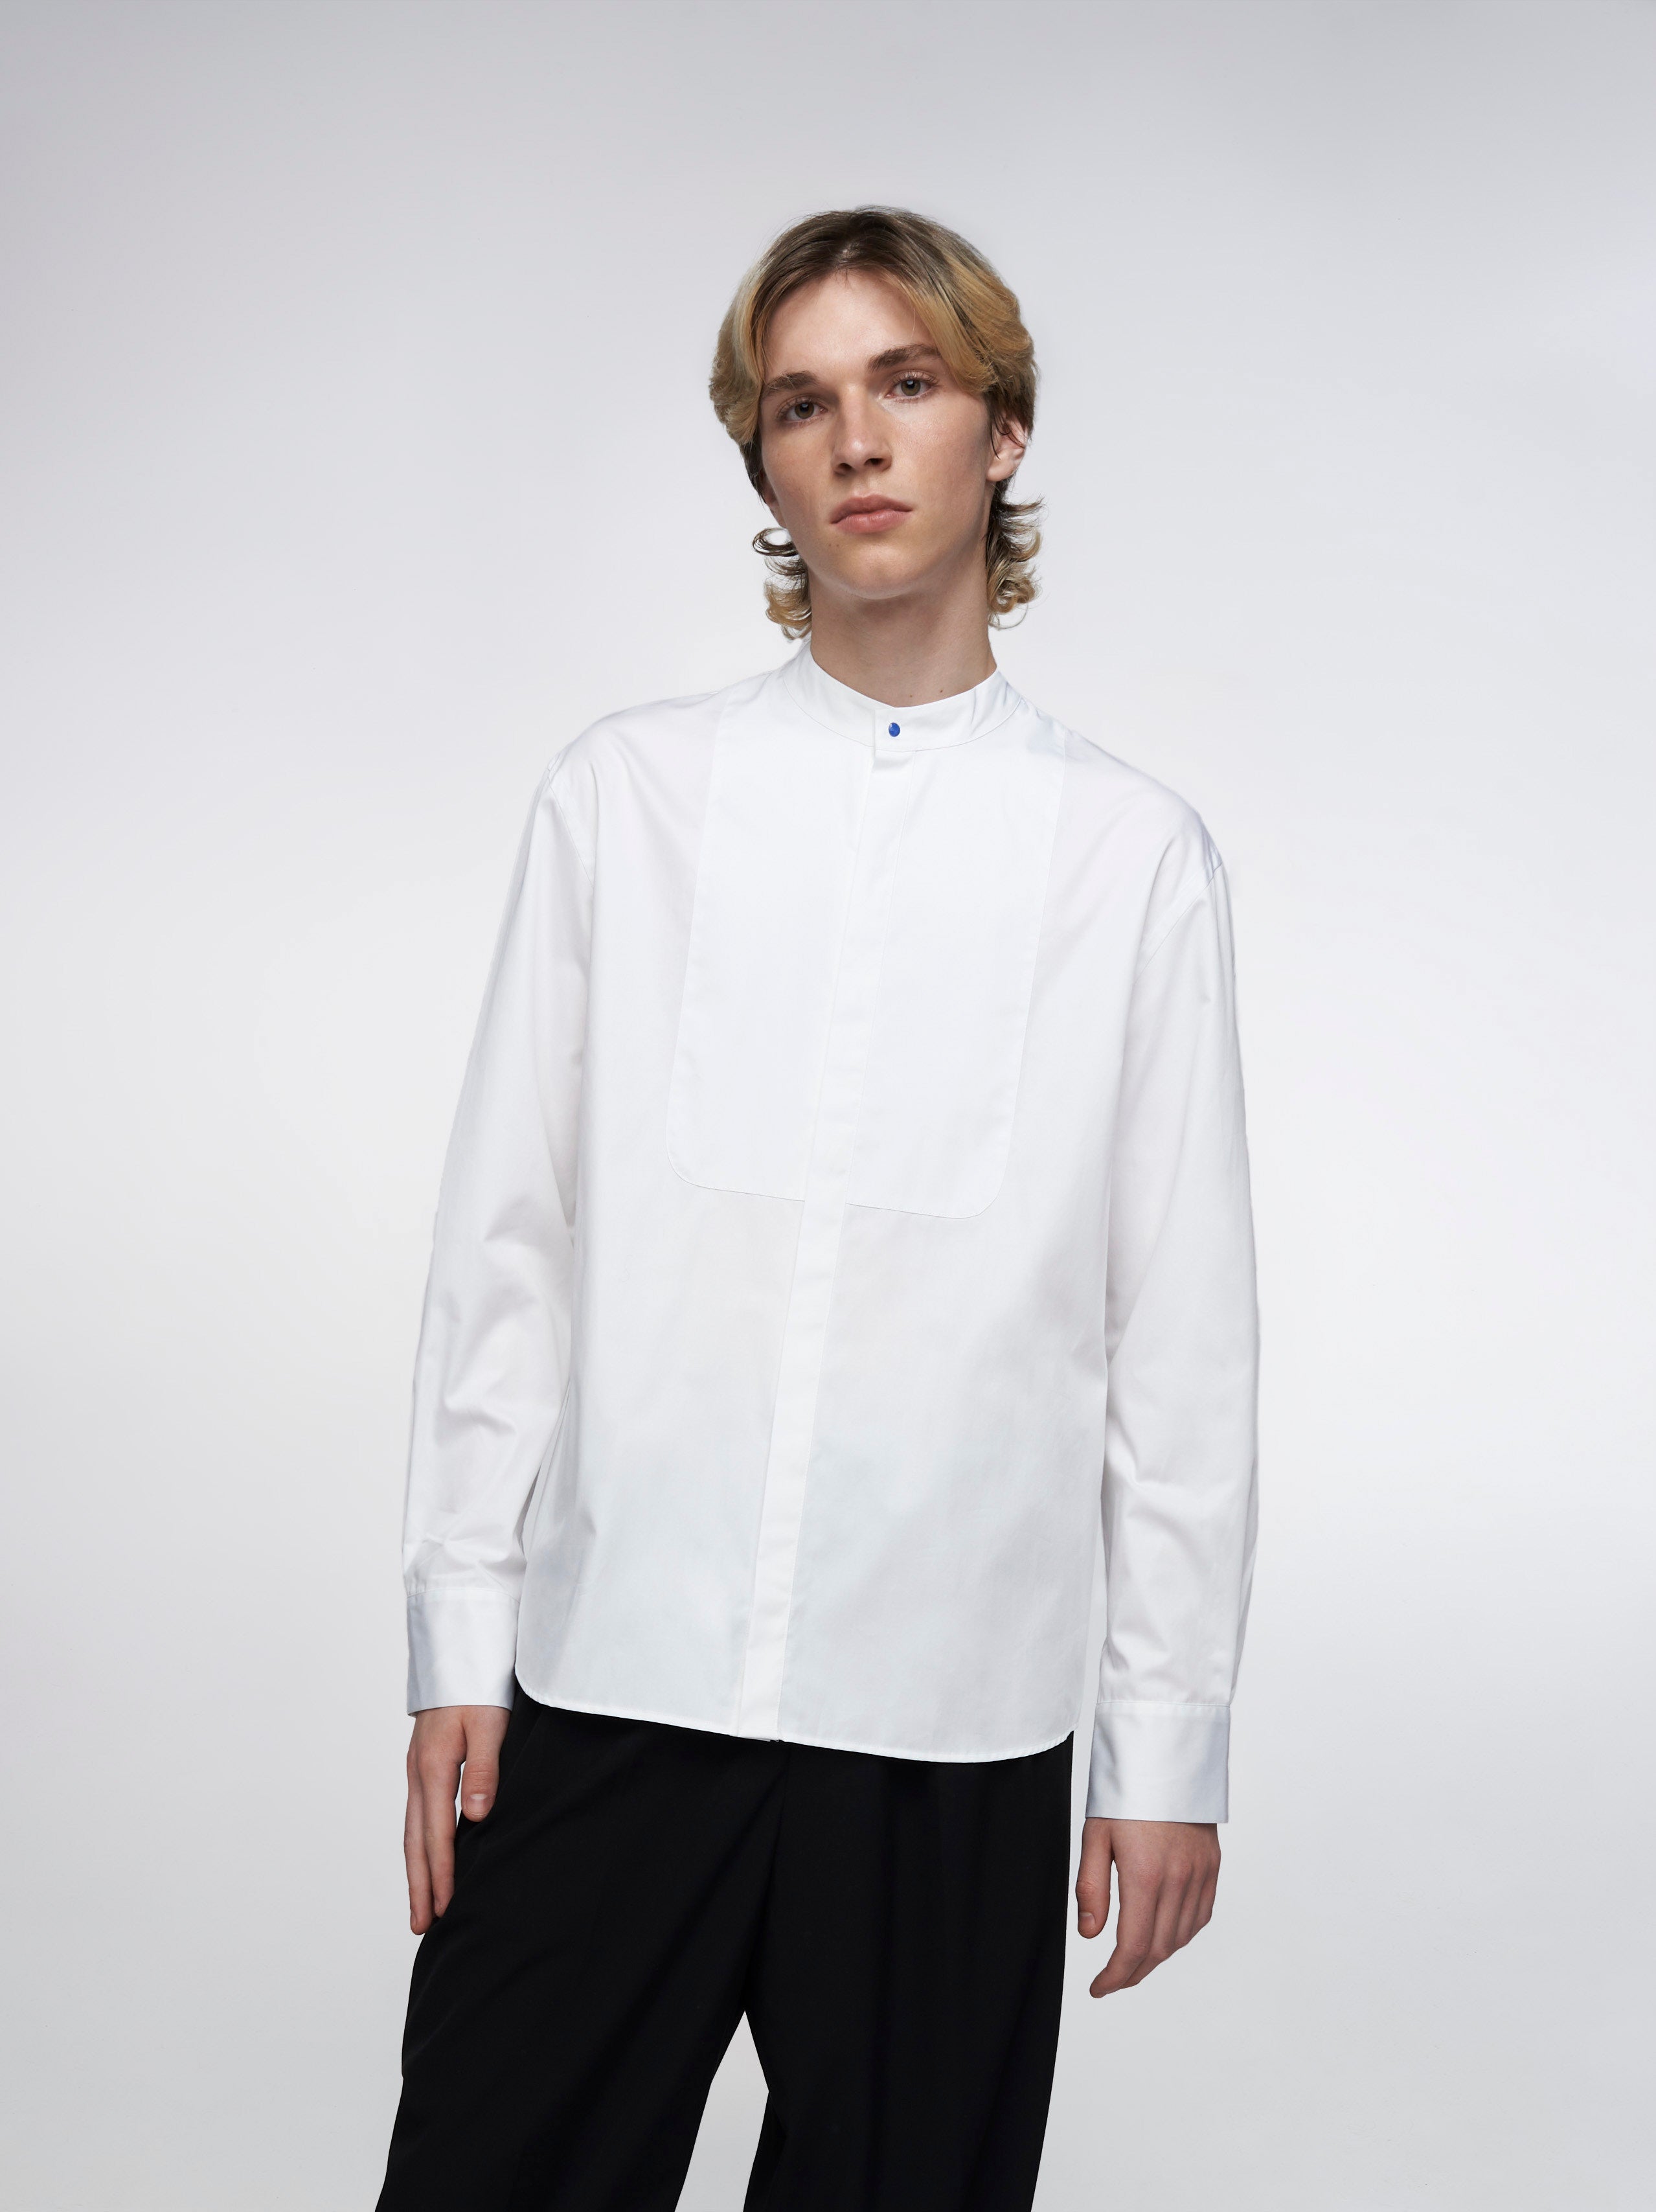 Relaxed Fit Unisex Shirt 05.2